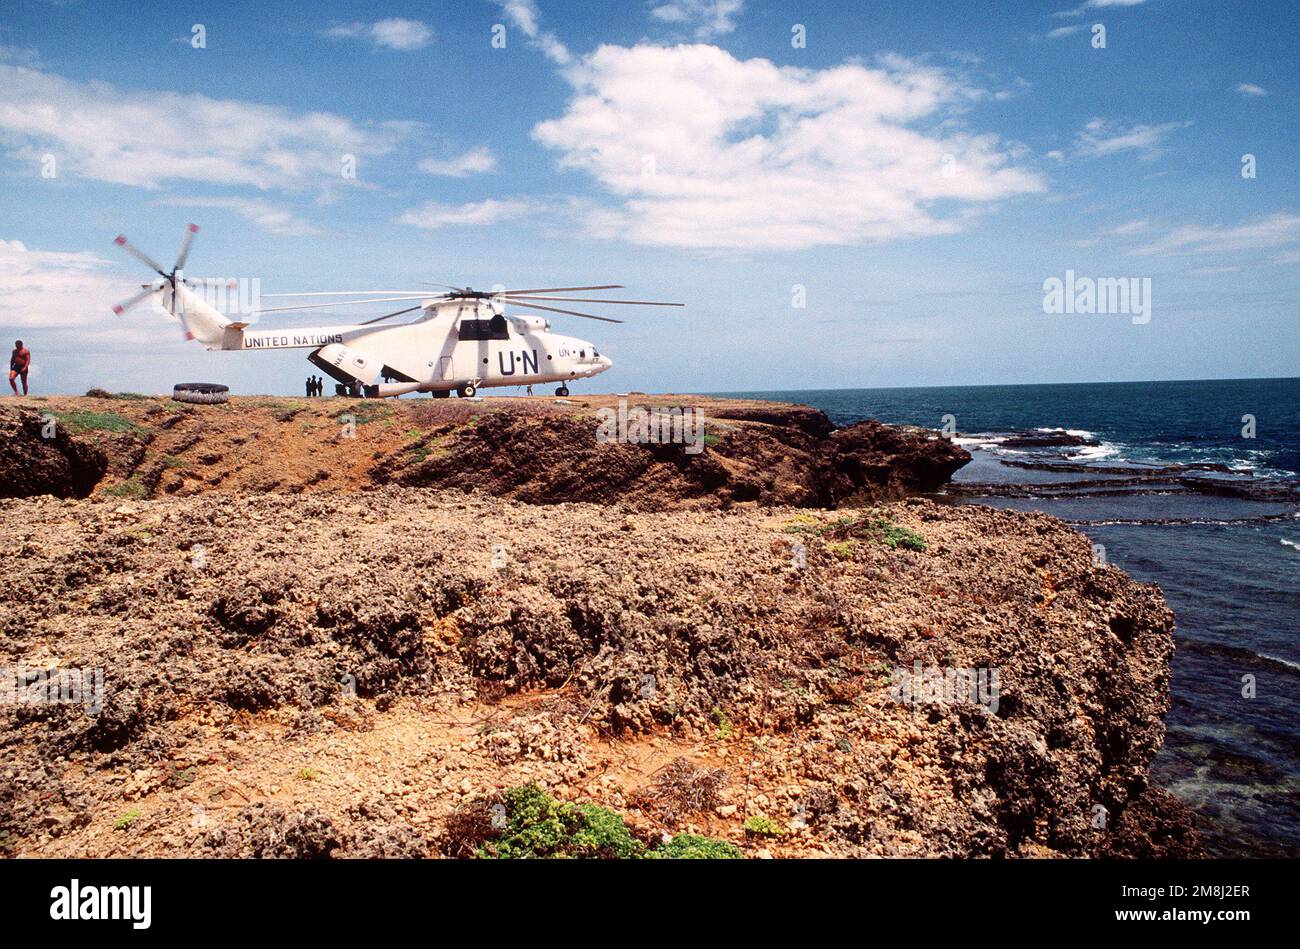 A Russian made Mi-26 Halo helicopter on the shores of Kismayo, Somalia. The Mi-26 Halo is used to shuttle supplies and personnel to areas outside Mogadishu during Operation CONTINUE HOPE. Subject Operation/Series: CONTINUE HOPE Base: Kismayo Country: Somalia (SOM) Stock Photo